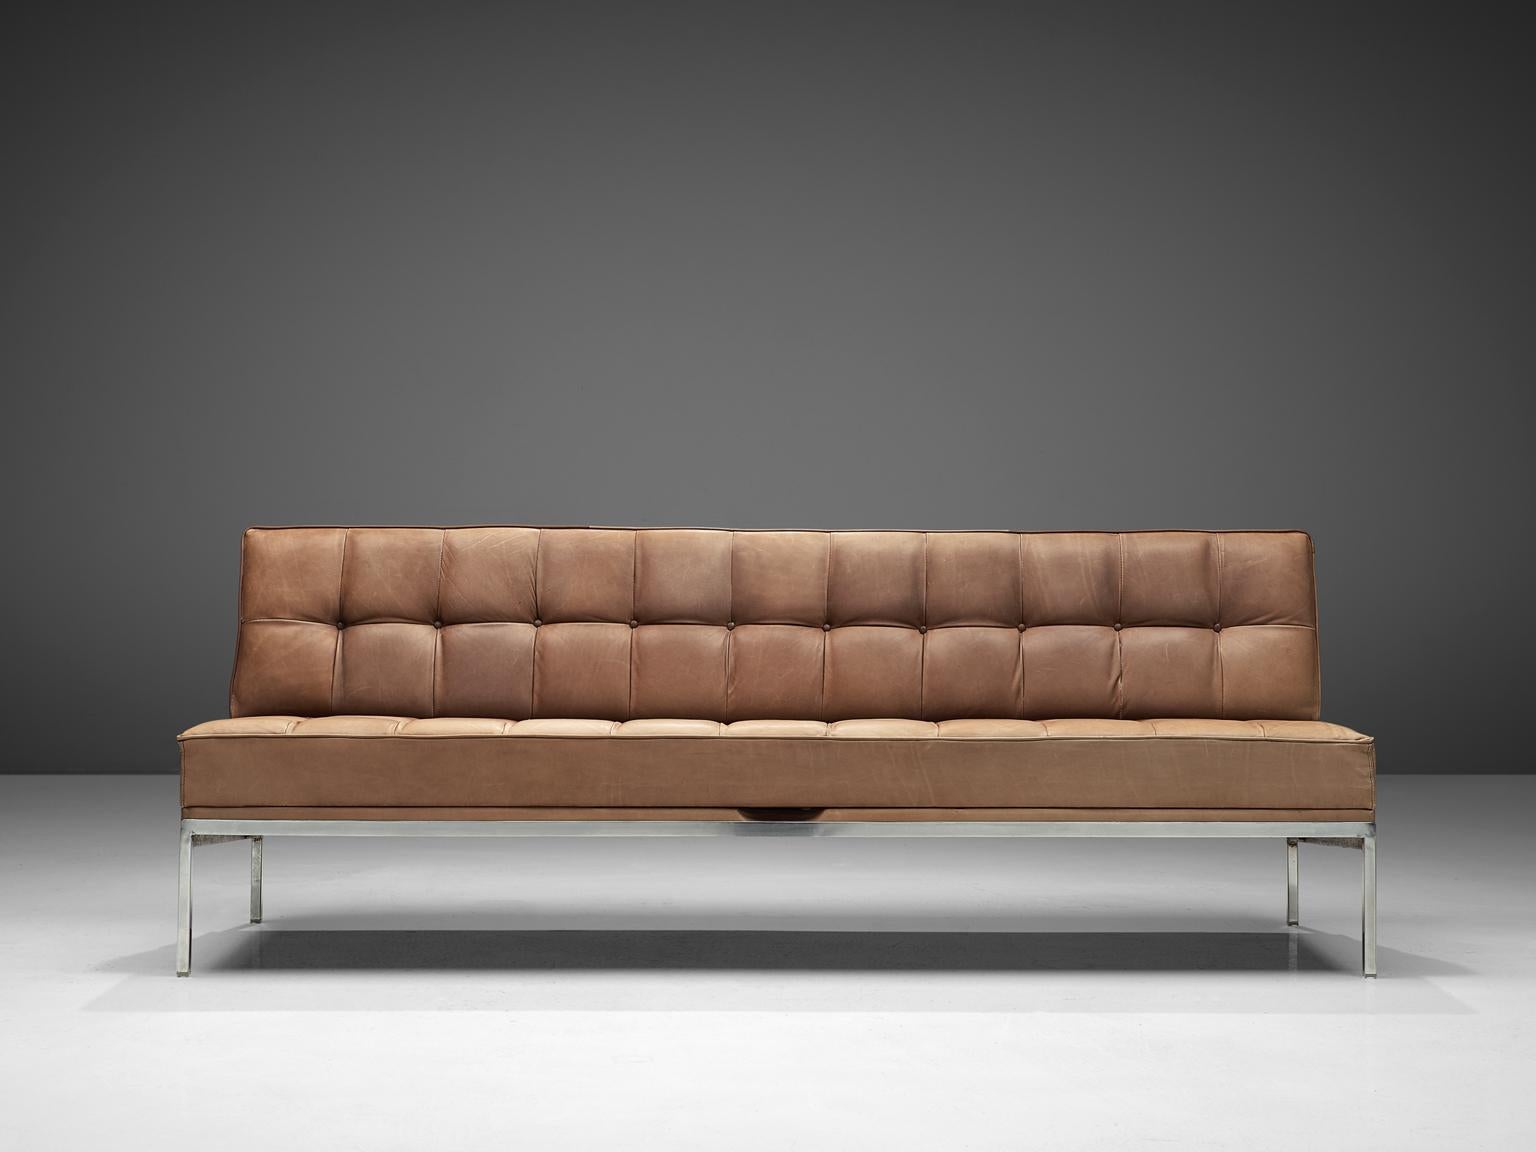 Brushed Johannes Spalt 'Constanze' Sofa in Taupe Leather